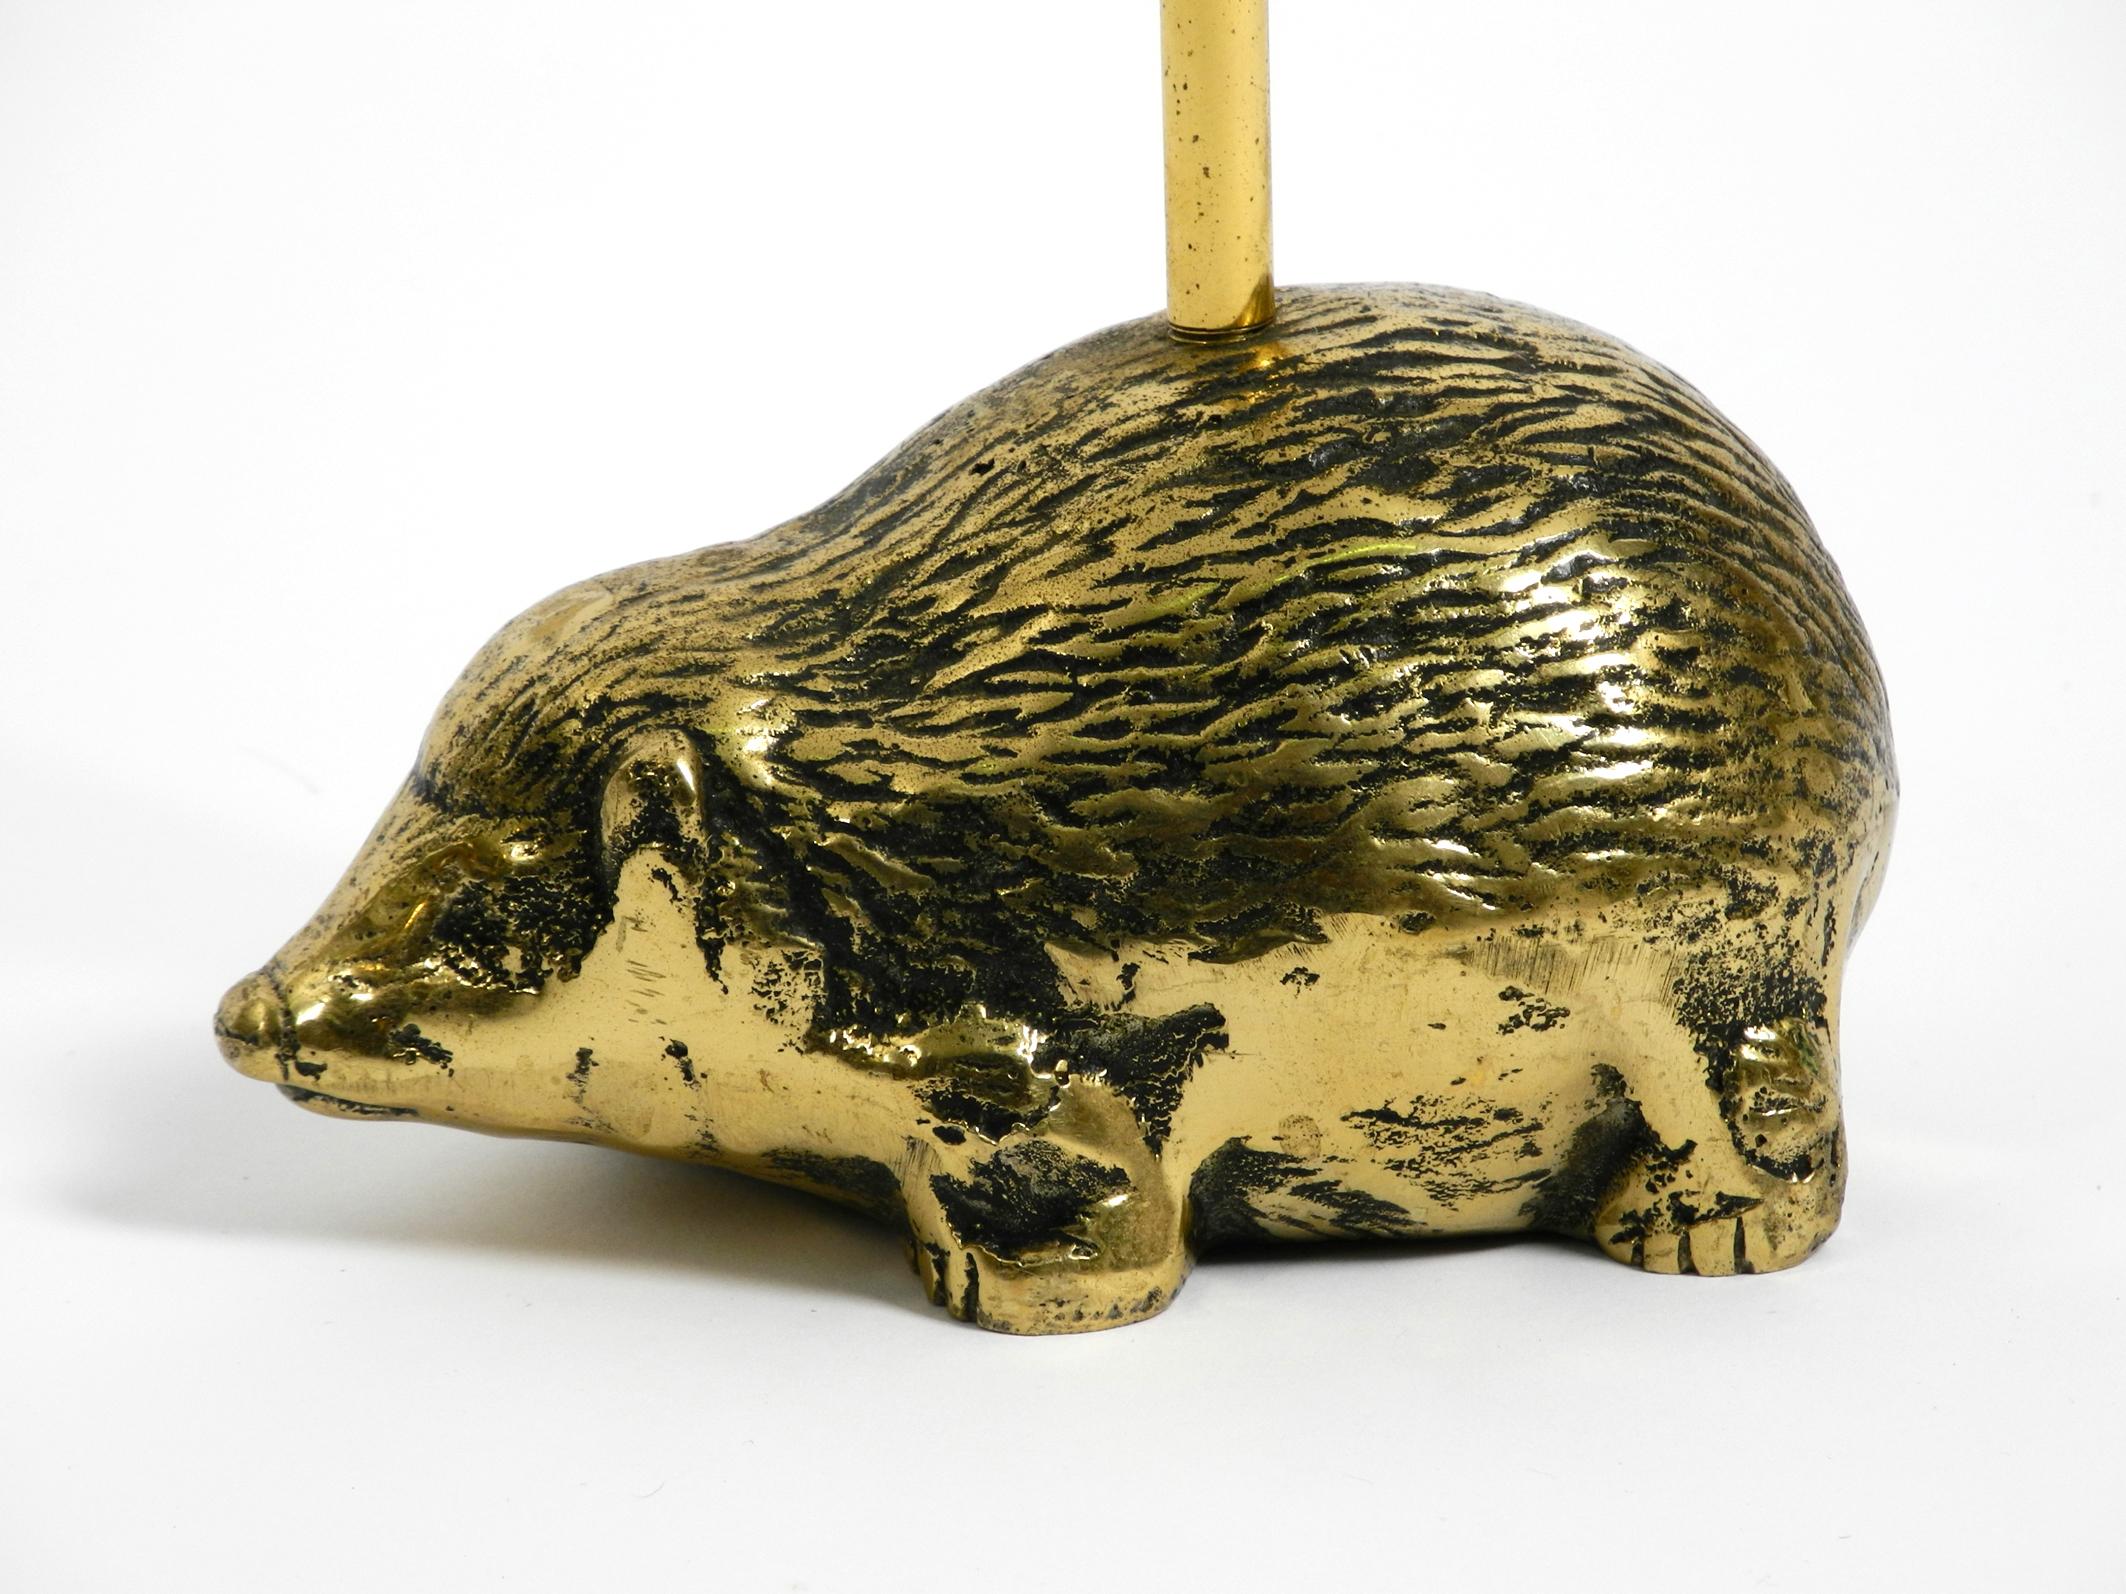 Rare, Very Heavy 1960s Doorstop Made of Solid Brass in the Shape of a Hedgehog 4